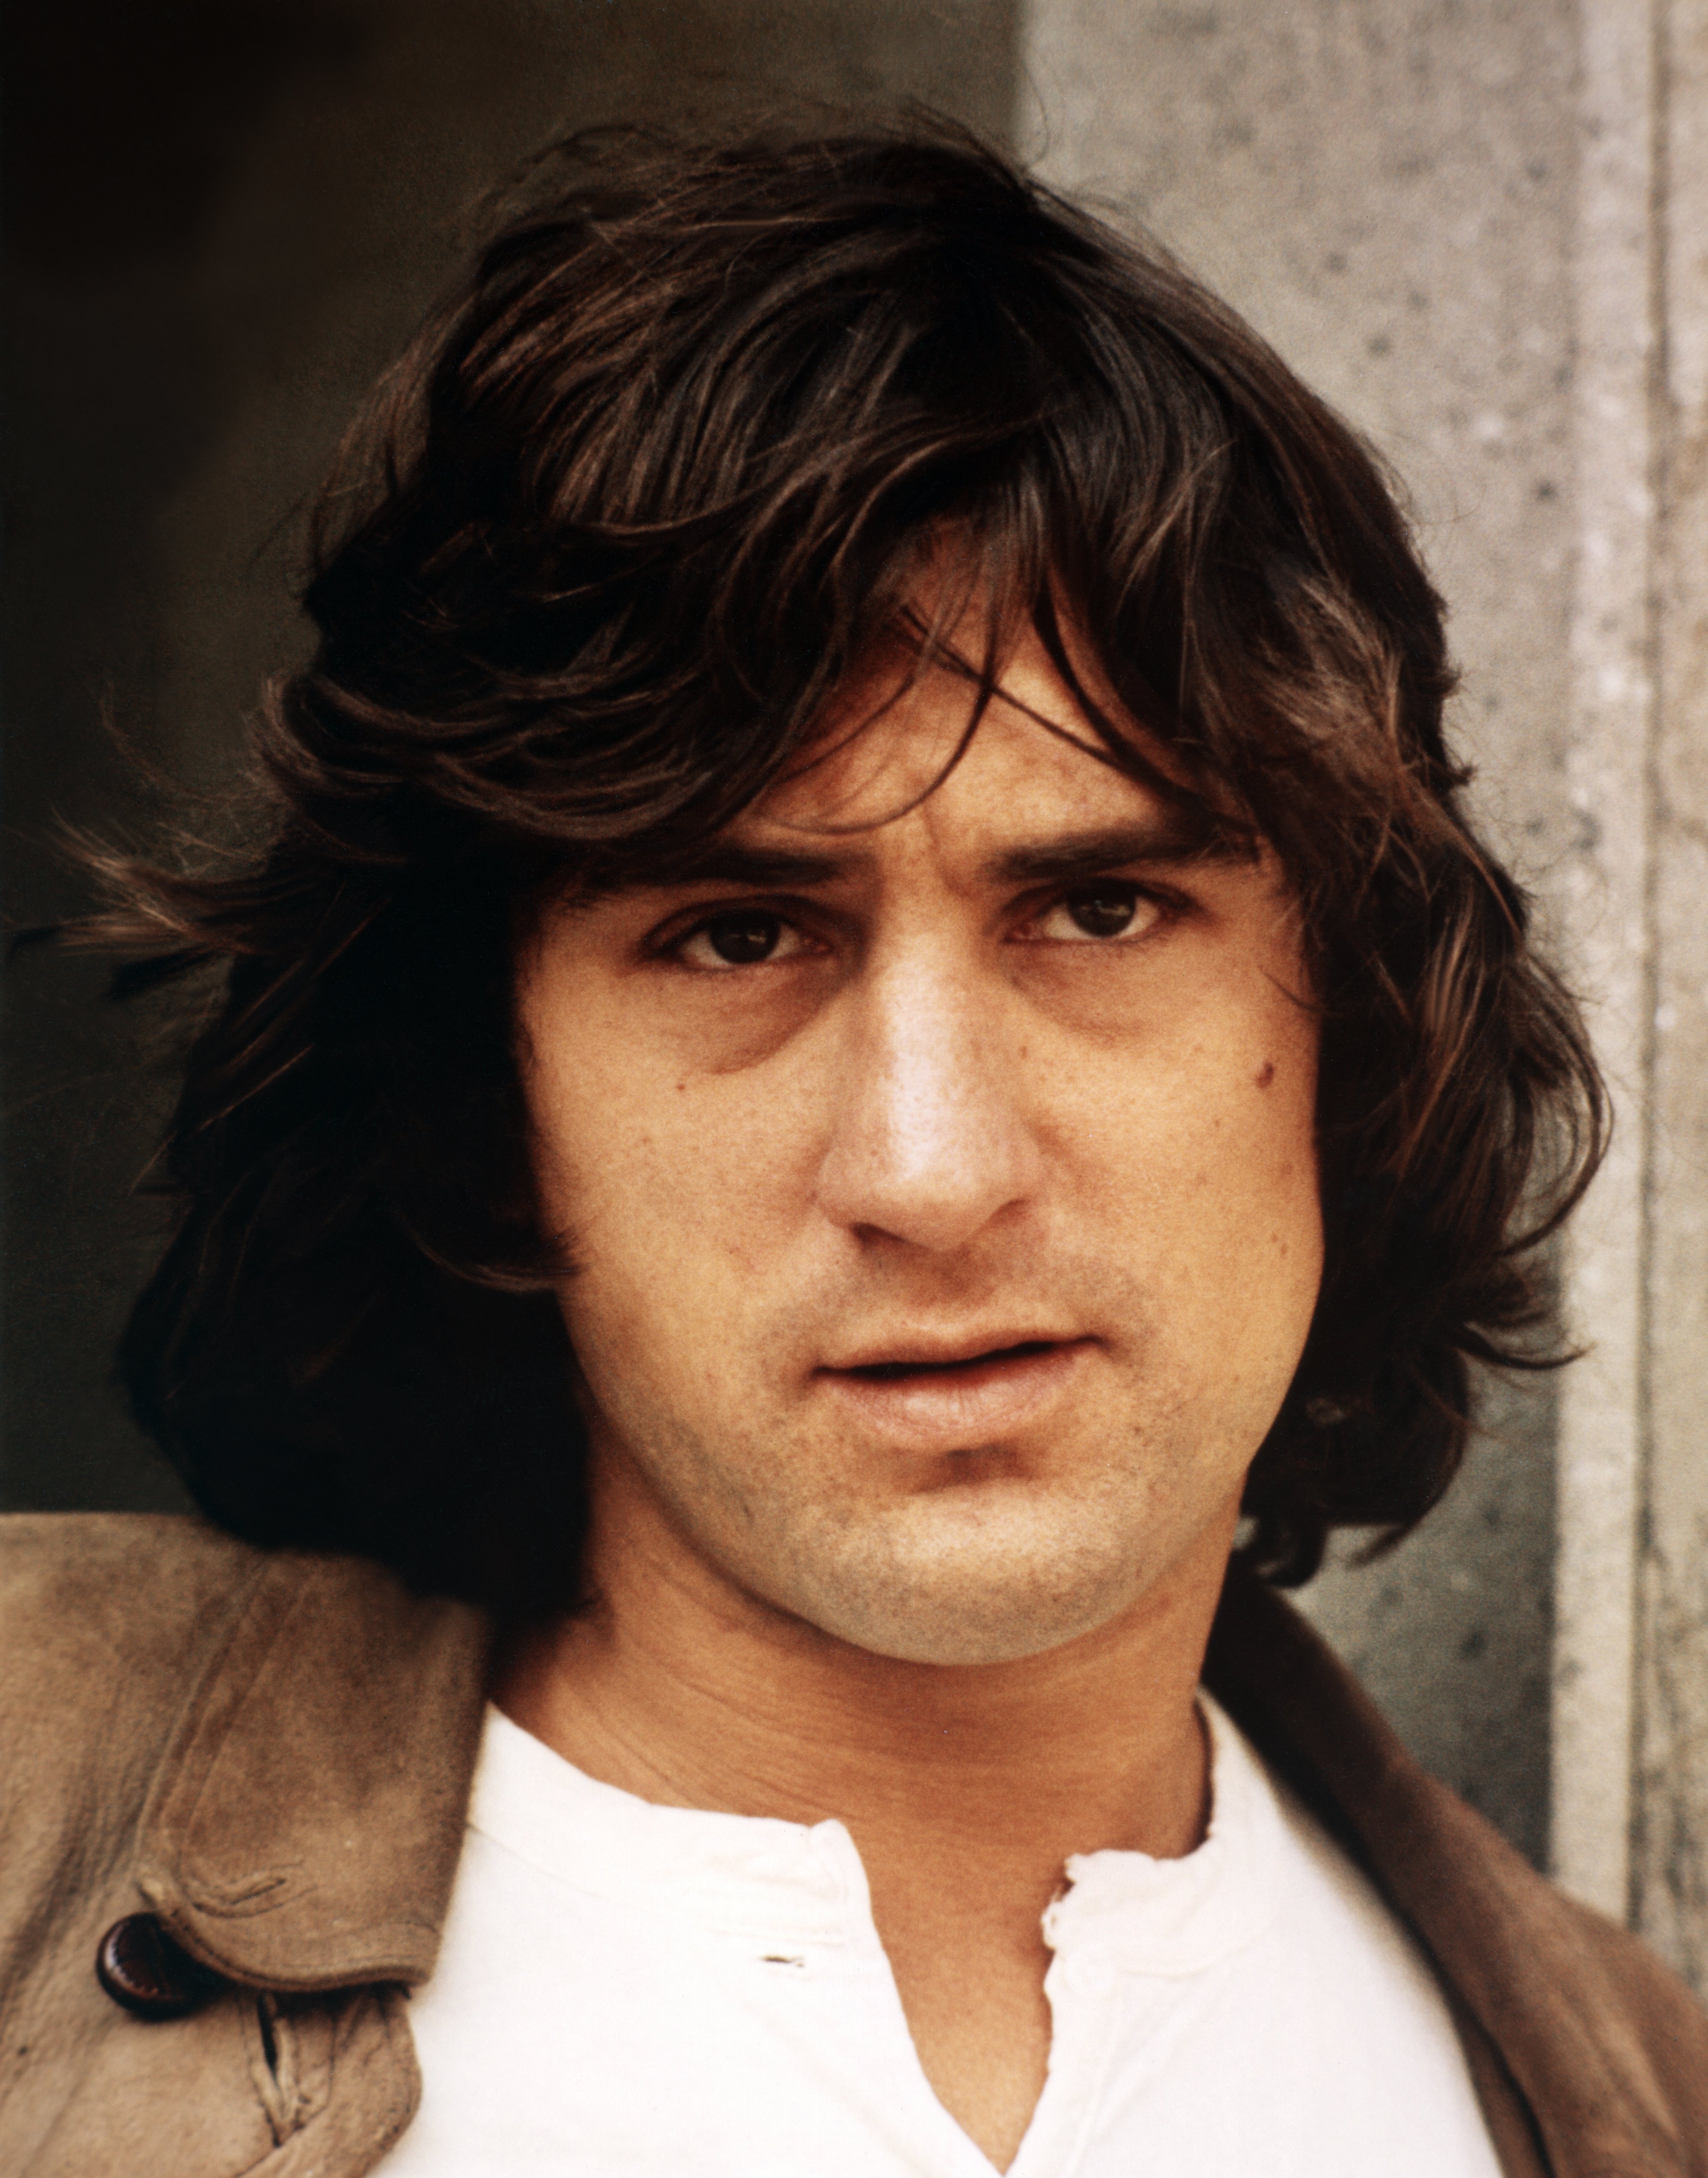 Robert De Niro on the set of "Mean Streets" circa 1973 | Source: Getty Images